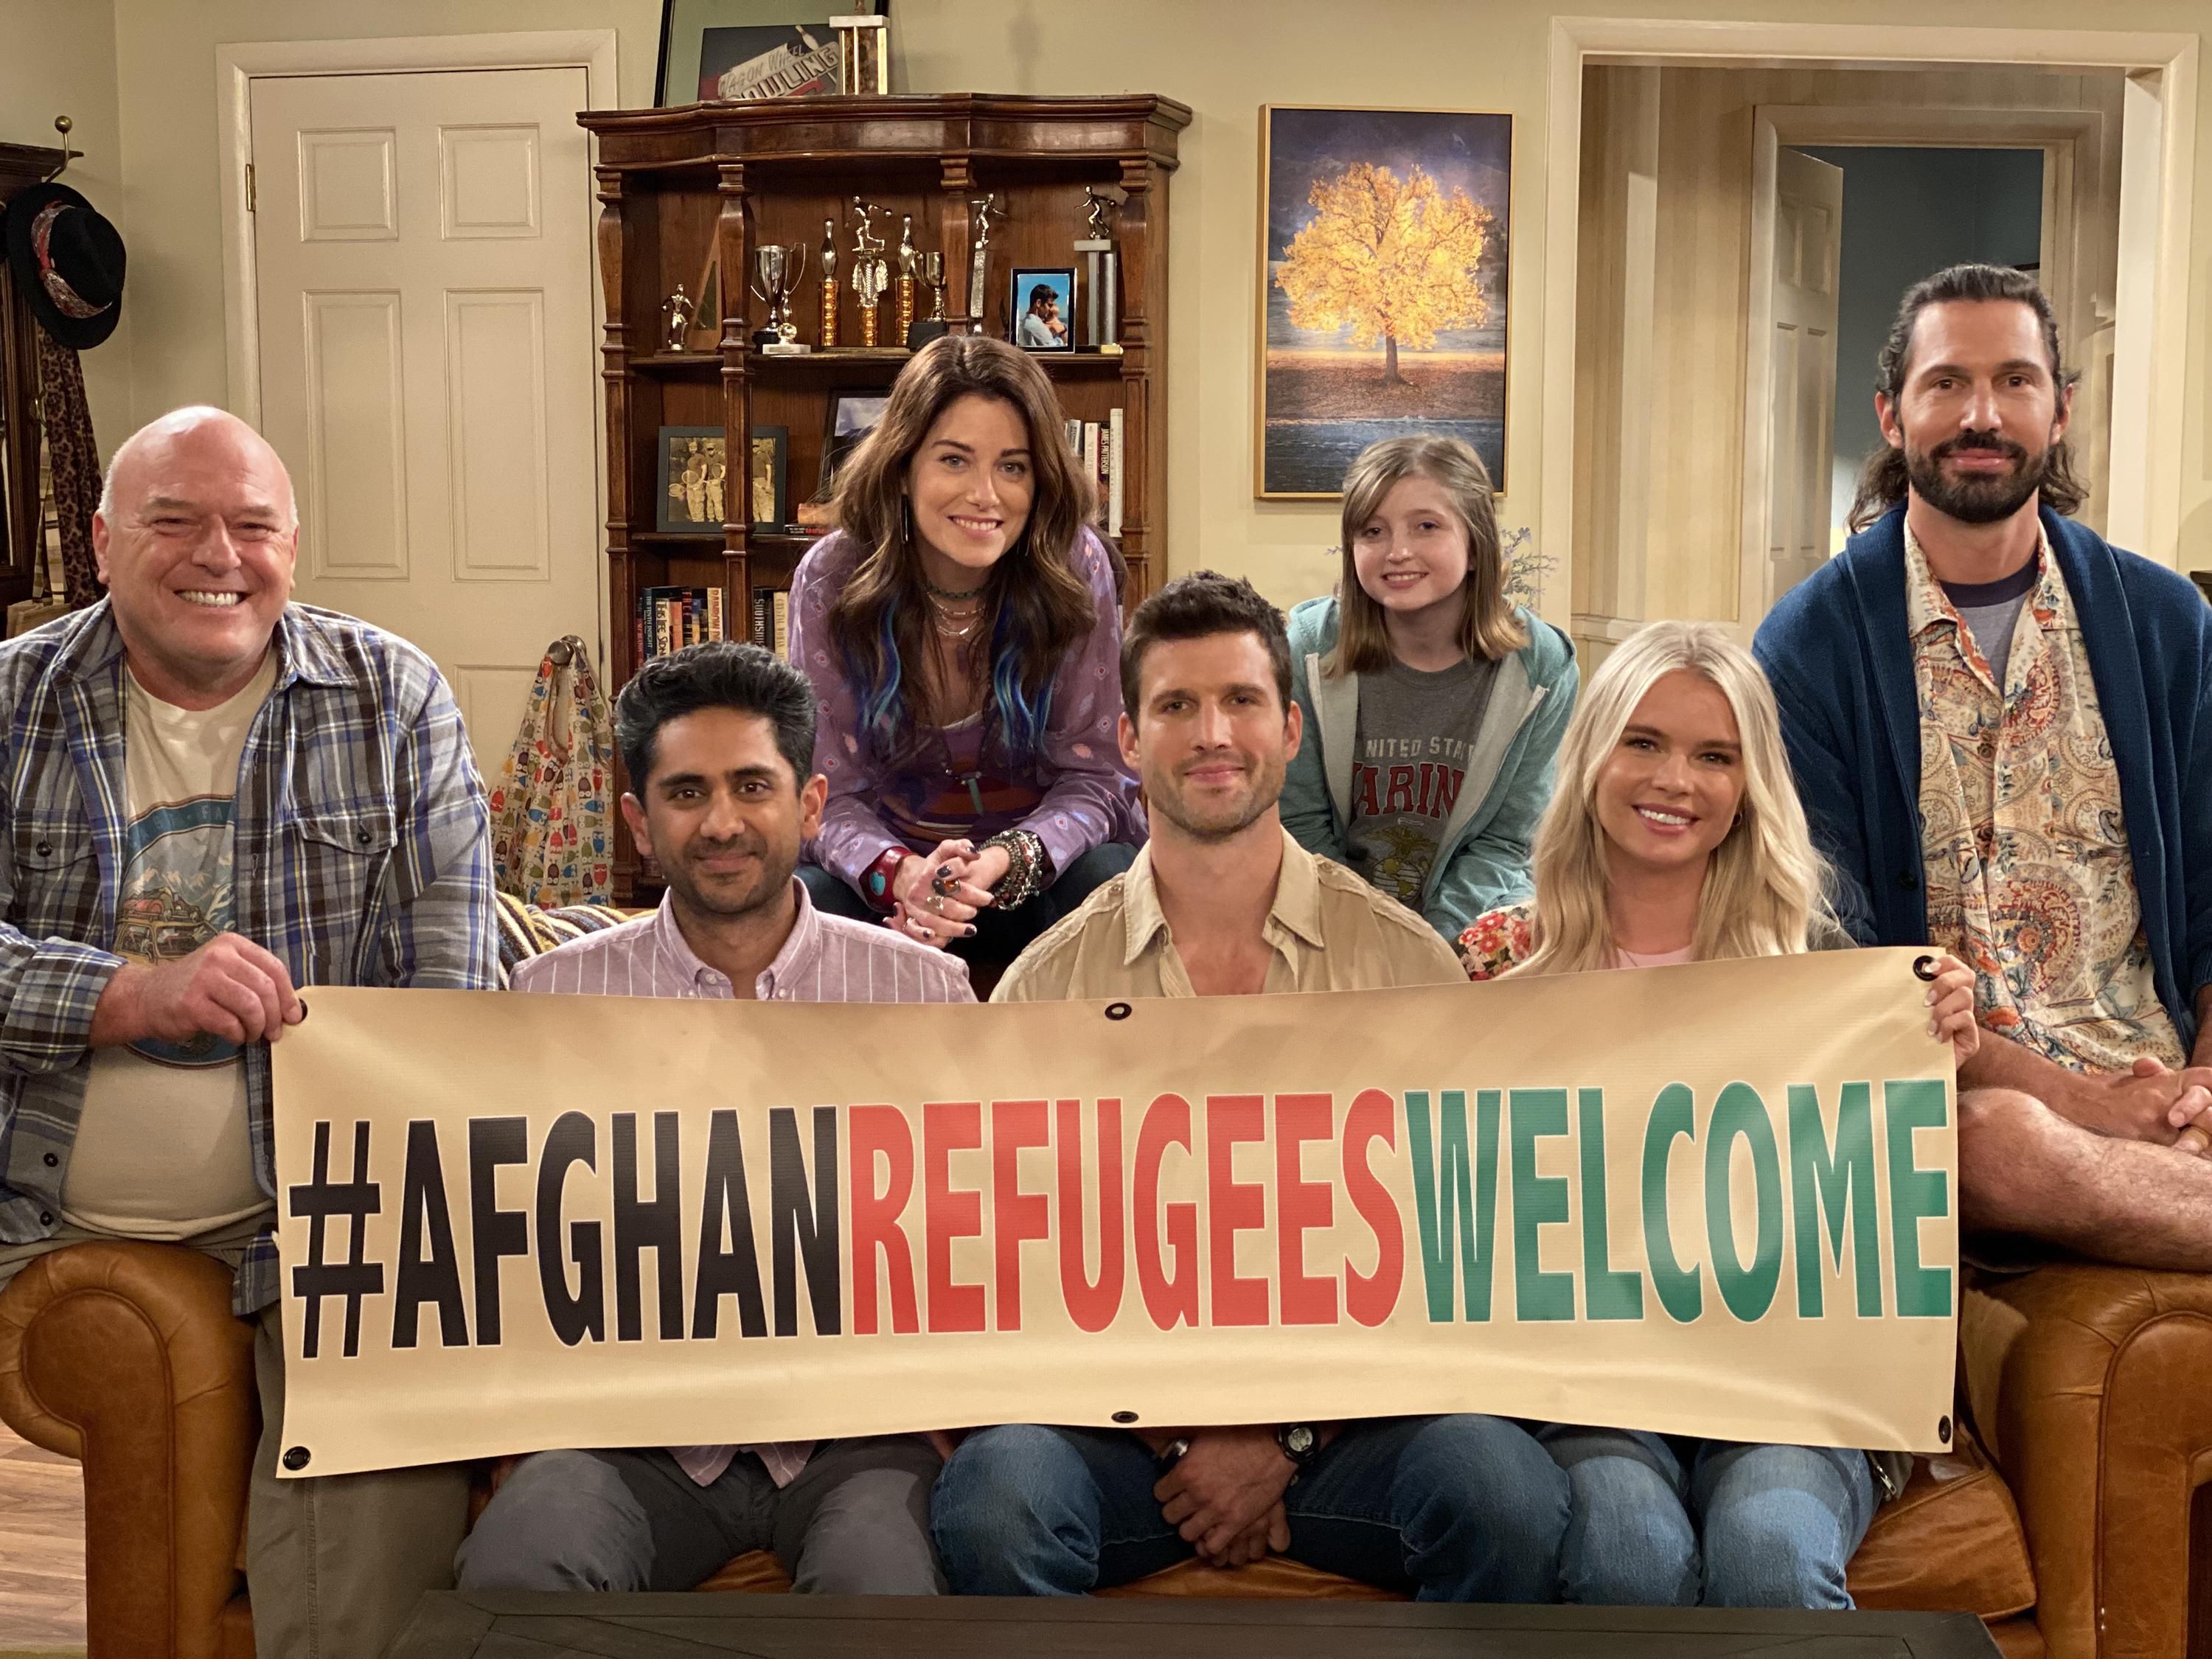 The cast of United States of Al holds up a sign proclaiming #afghanrefugeeswelcome